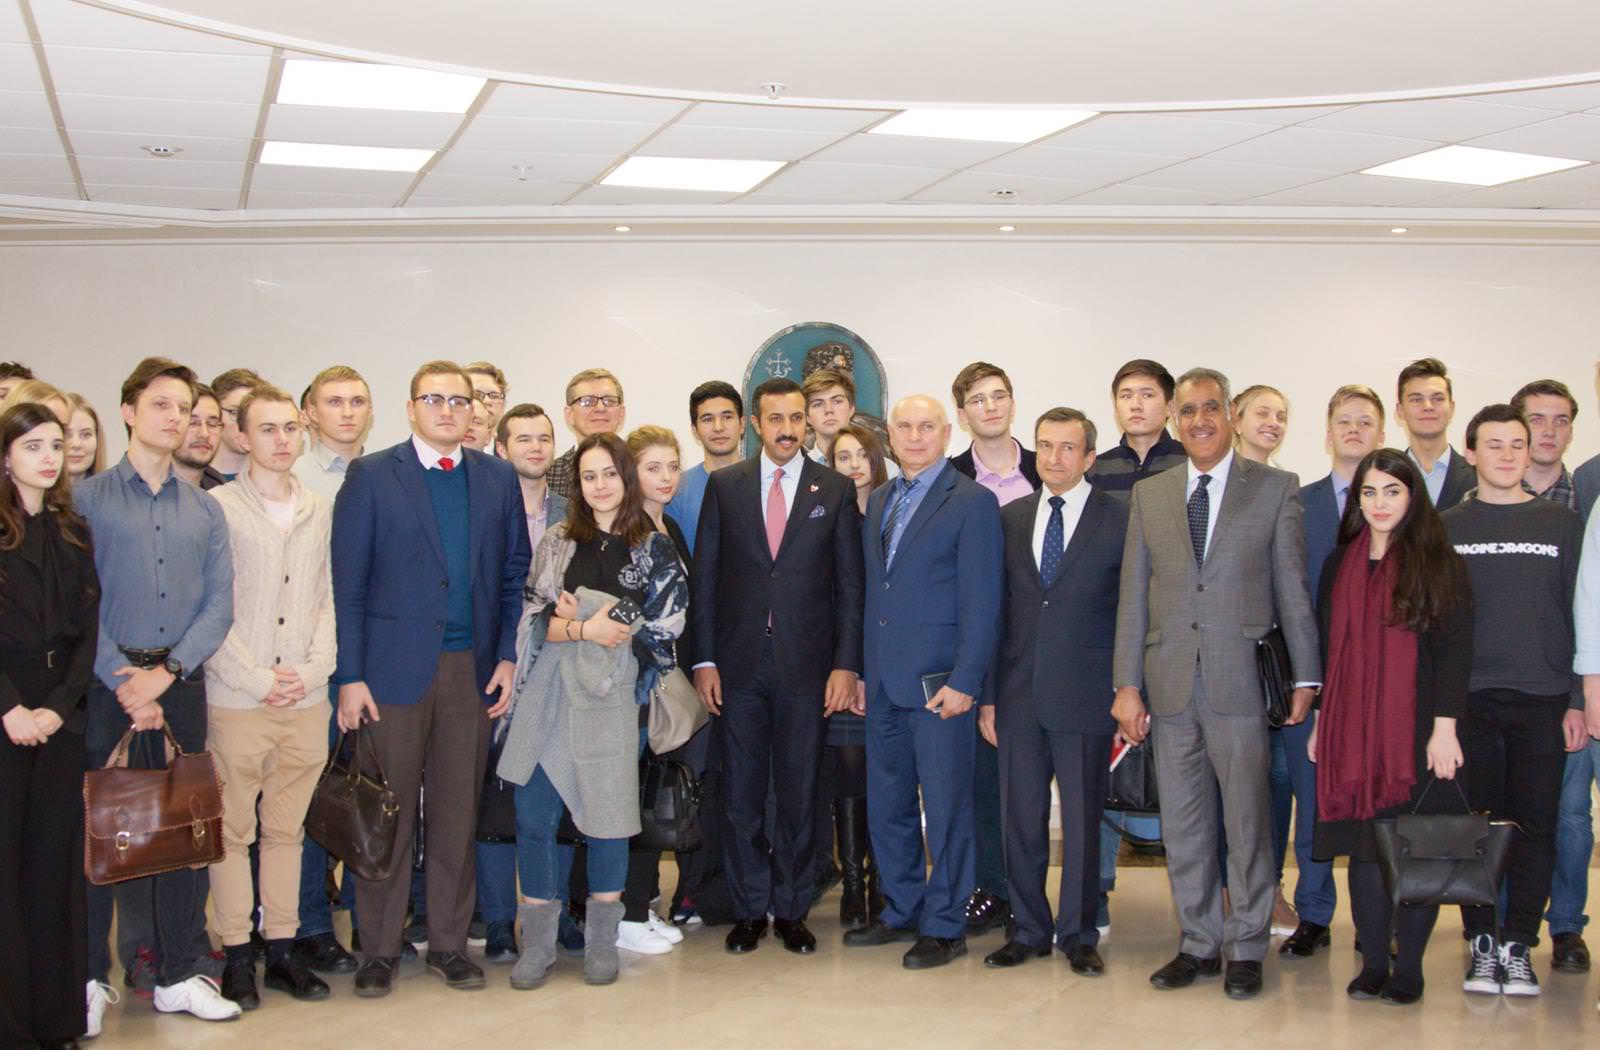 Bahrain – Russia Strategic Partnership: Lecture at the Moscow Institute of International Relations